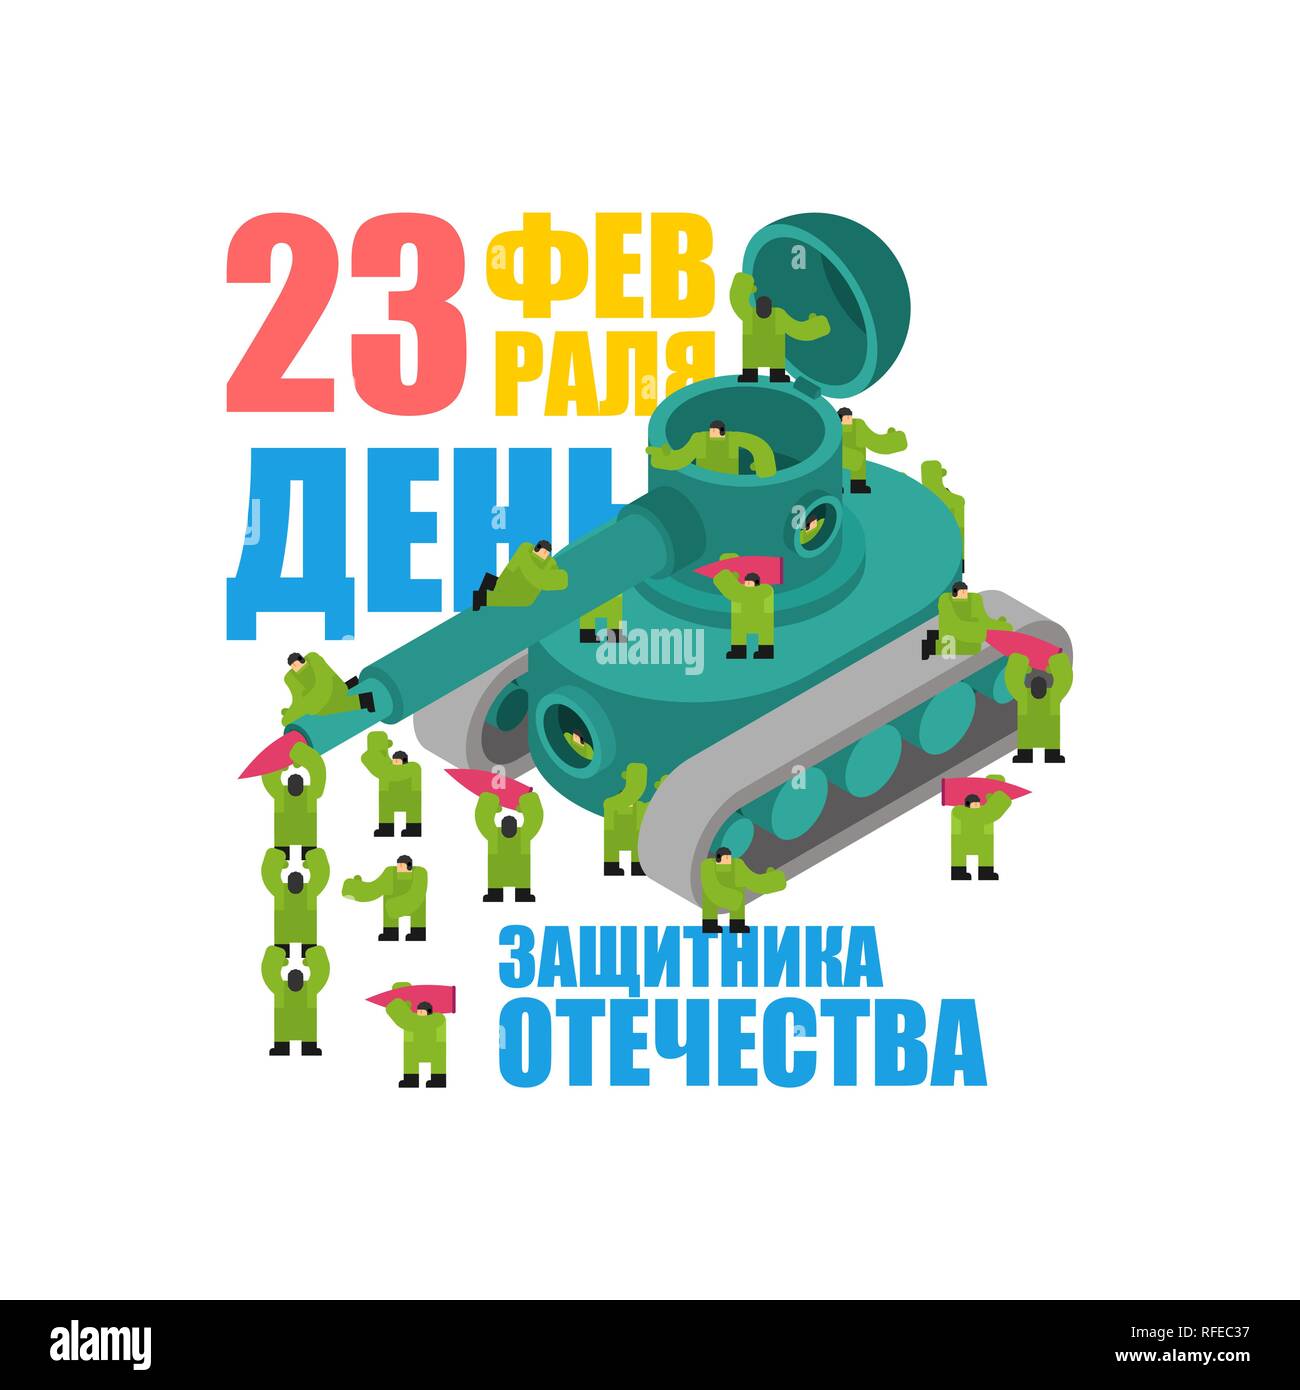 23 February. Tank and soldiers. Defender Fatherland Day. Holiday in Russia. Russian text. February 23. Congratulations Stock Vector